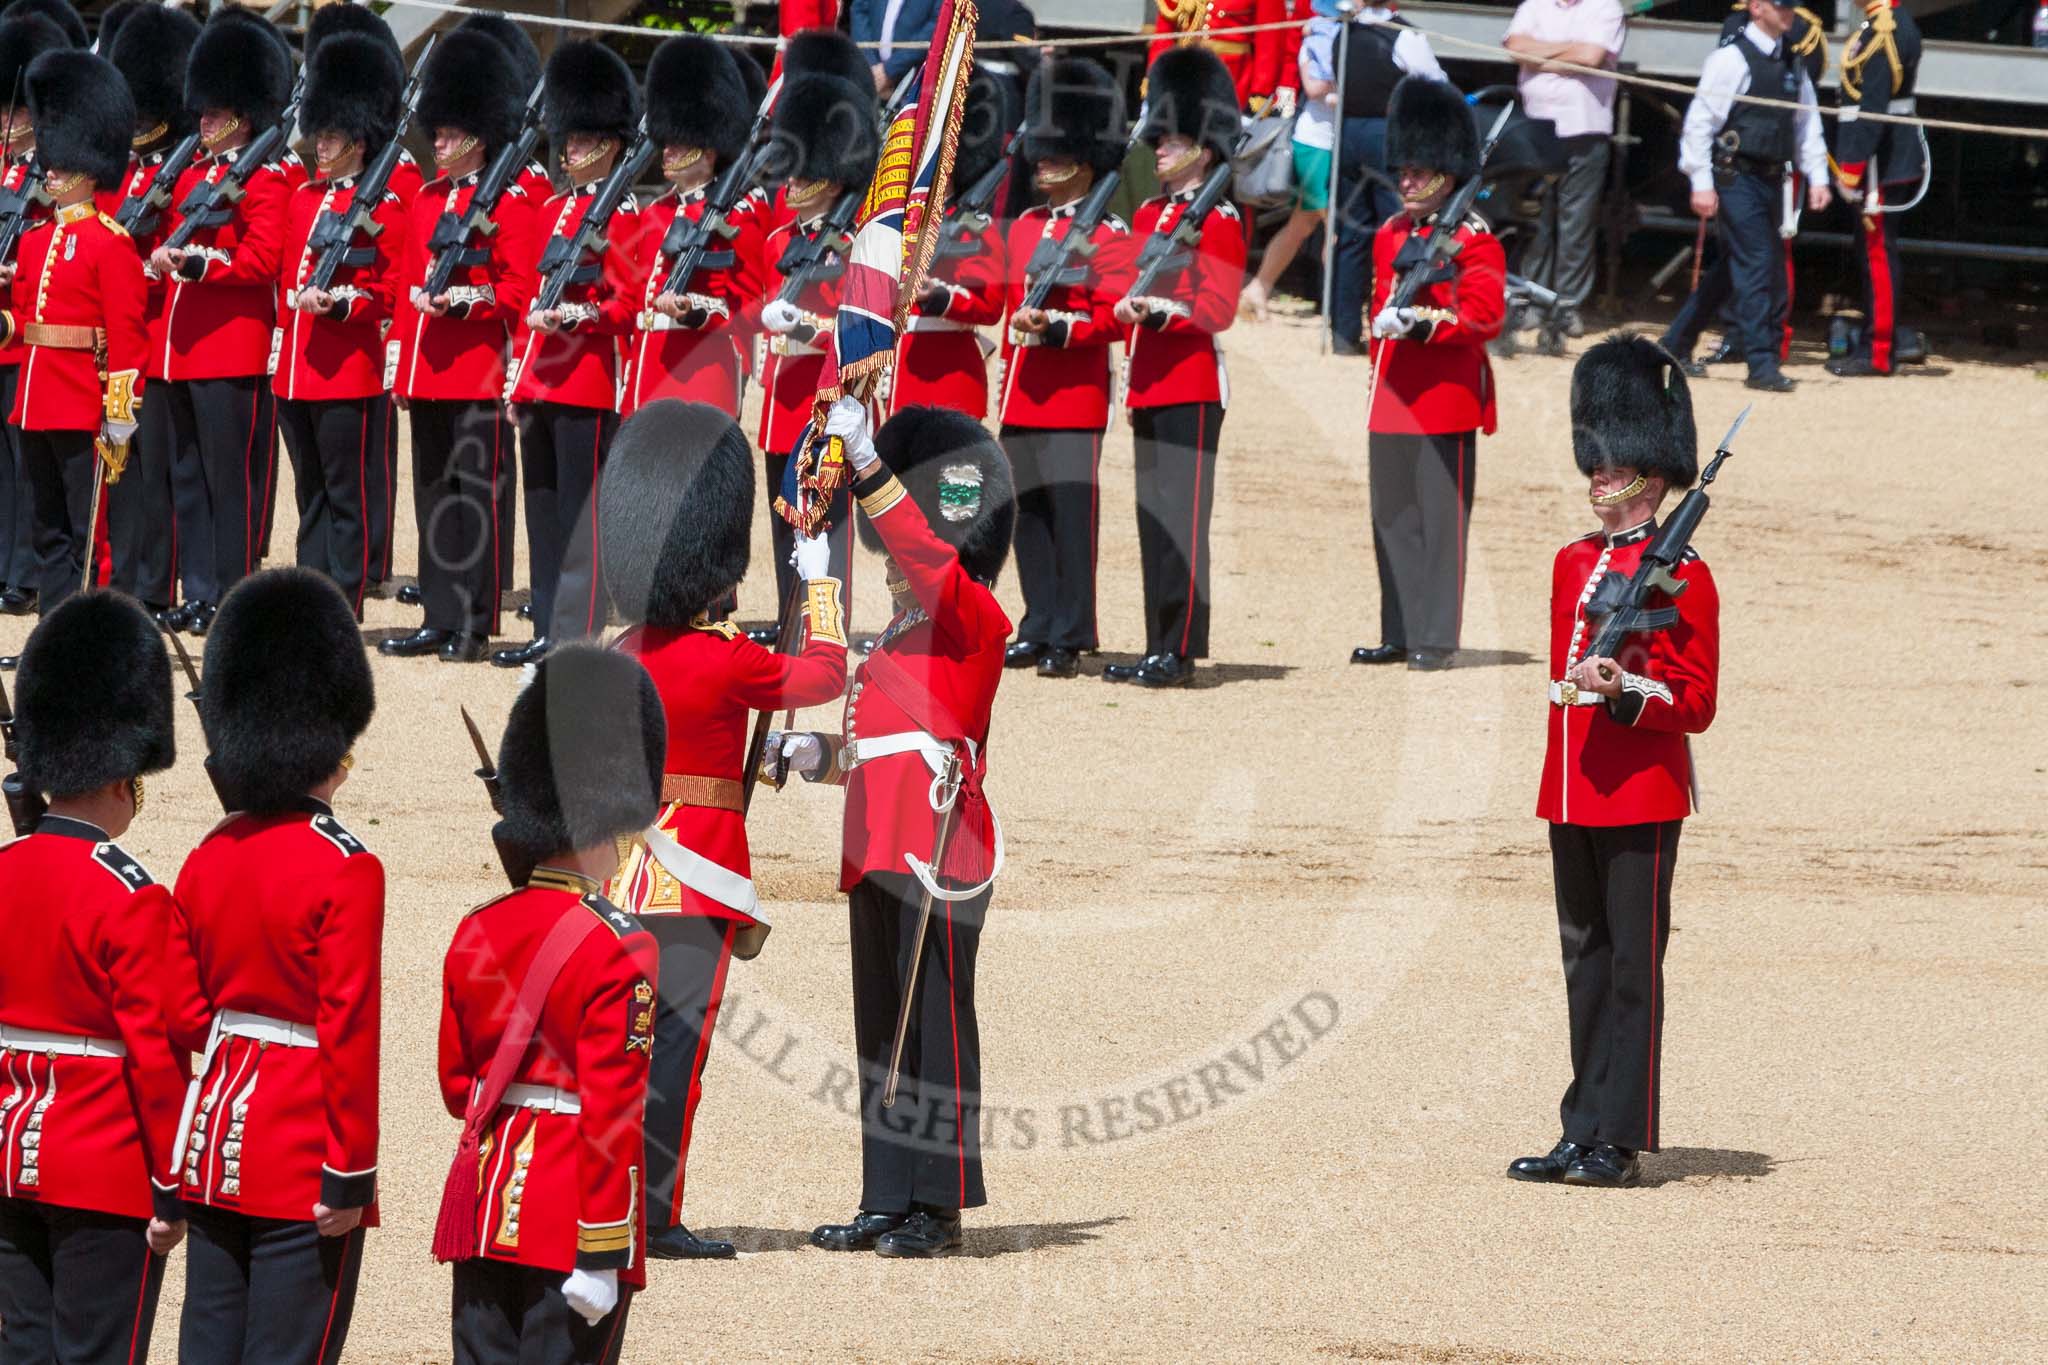 The Colonel's Review 2015.
Horse Guards Parade, Westminster,
London,

United Kingdom,
on 06 June 2015 at 11:20, image #312